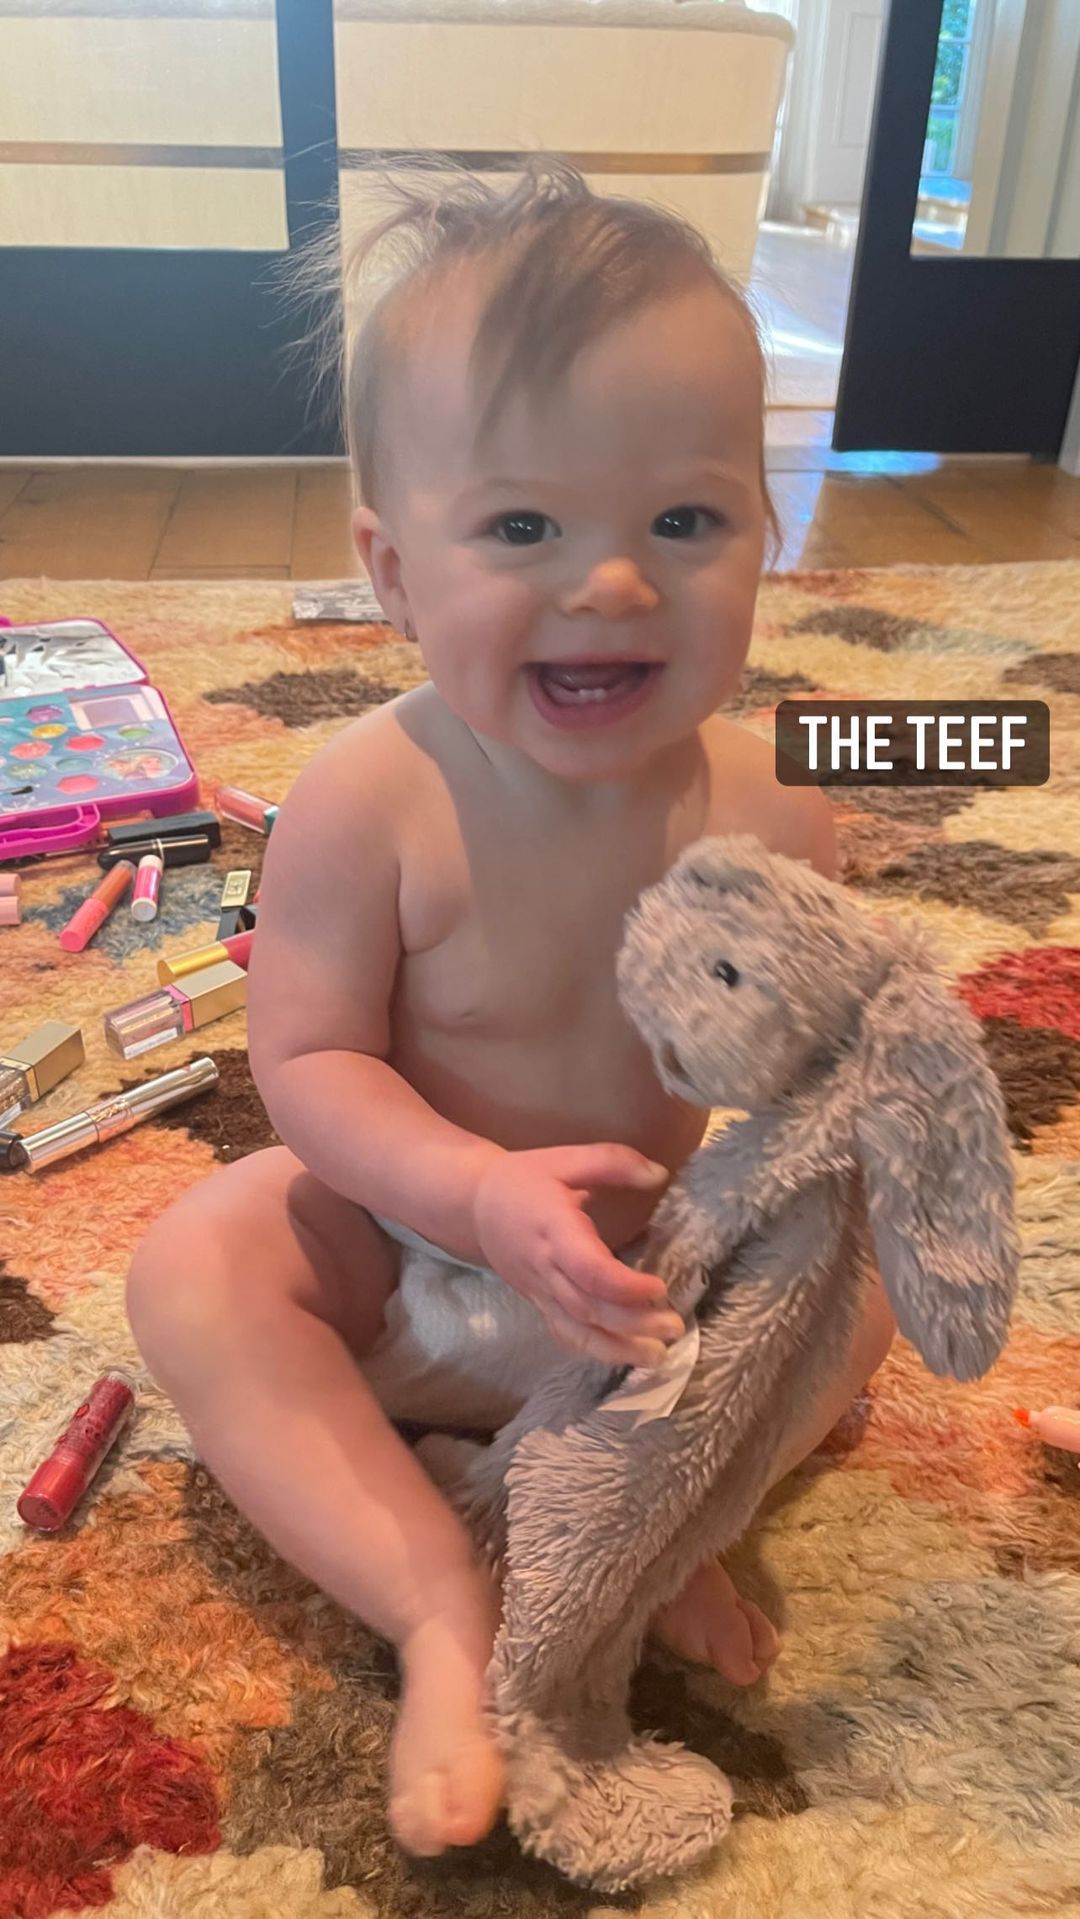 Growing Up! Hilary Duff Shows 9-Month-Old Daughter Mae’s New Teeth